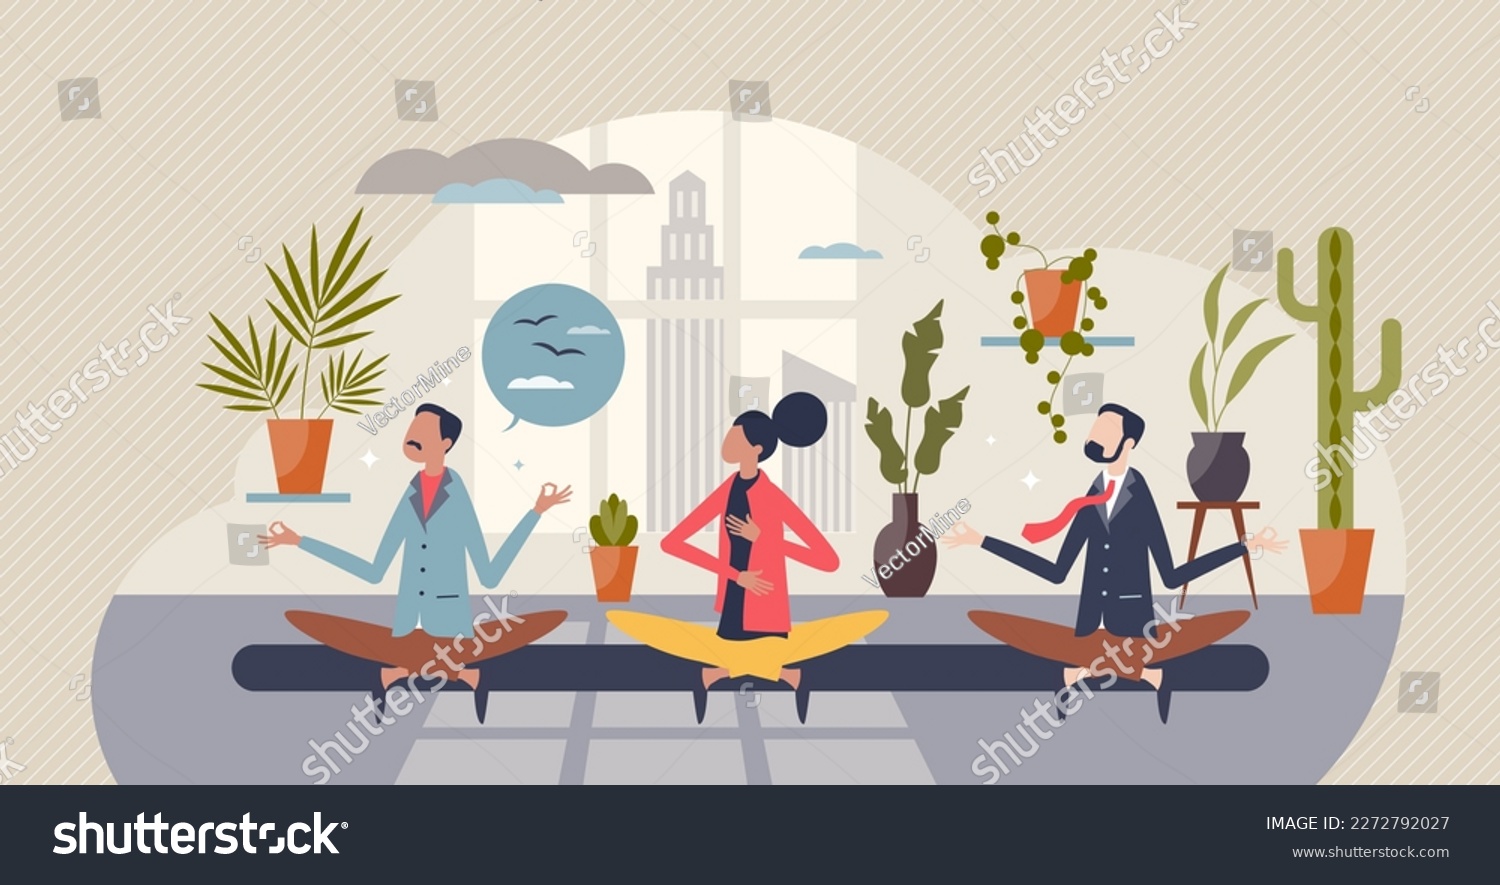 SVG of Employee wellness program or company stress free activity tiny person concept. Yoga or meditation in workplace or office for worker satisfaction, health, productivity and harmony vector illustration. svg